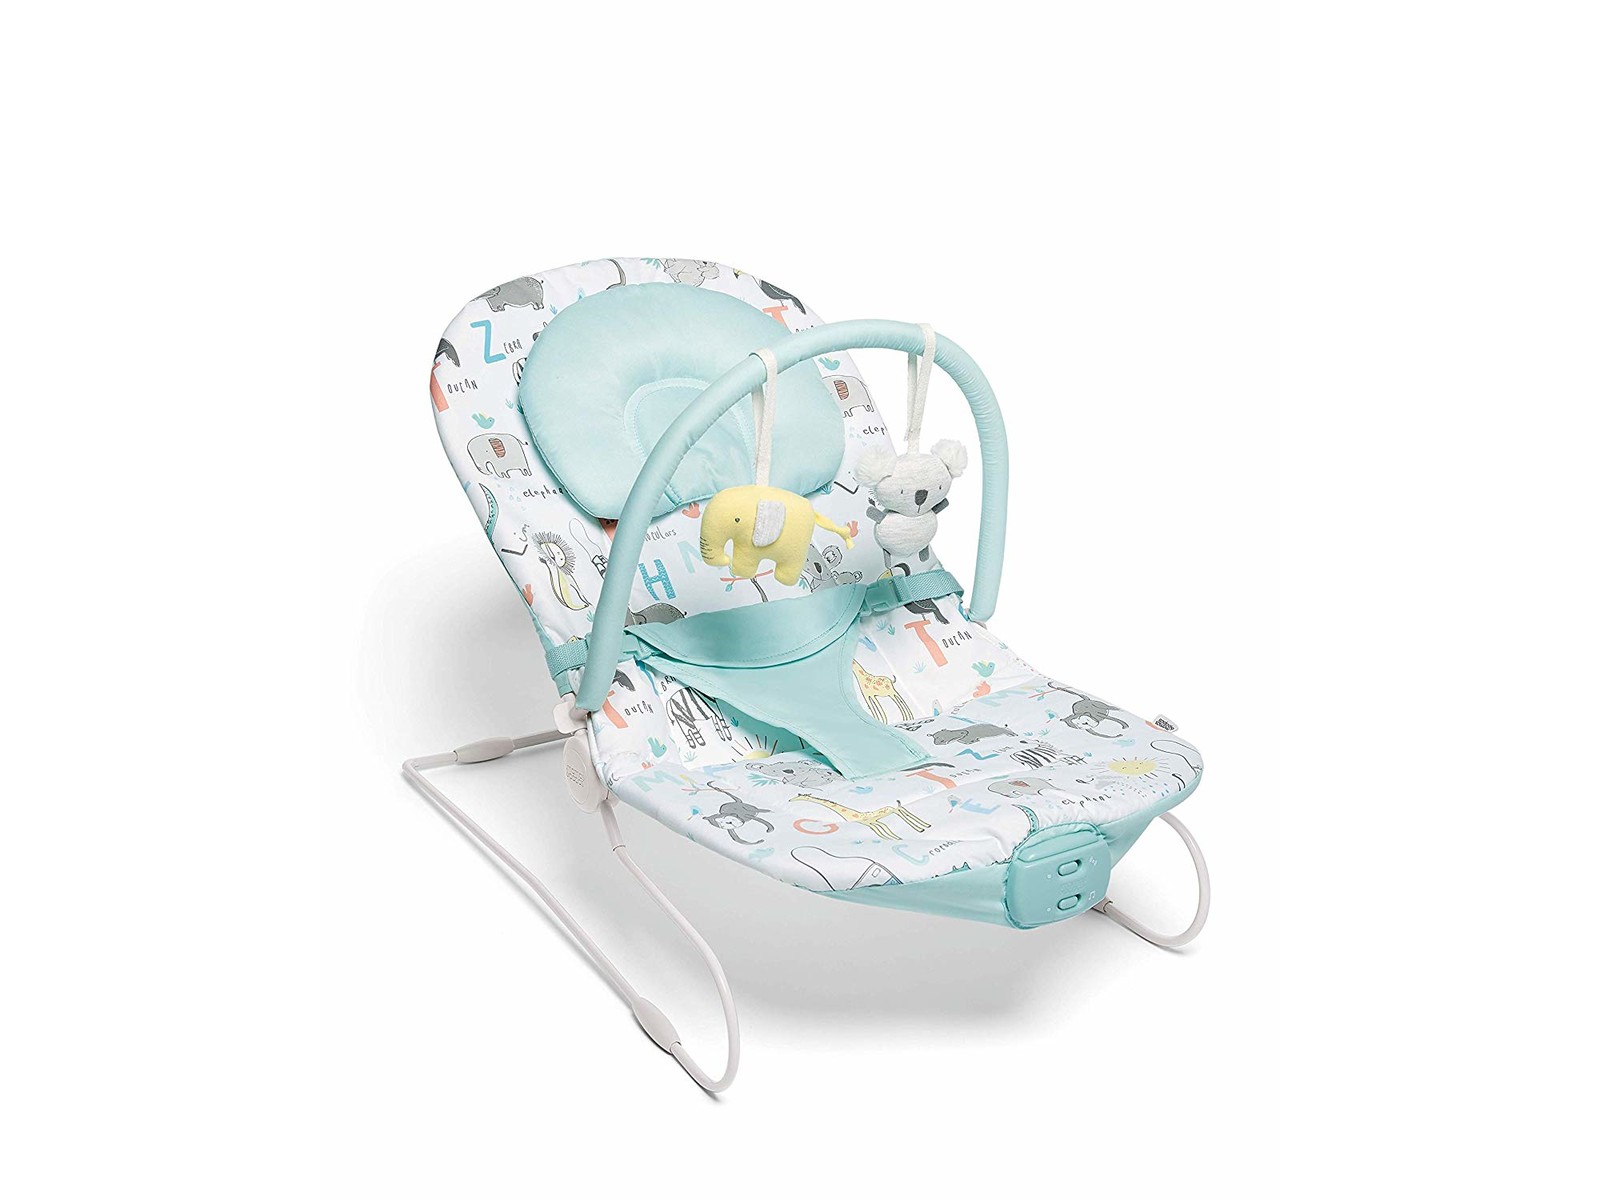 baby bouncer safety